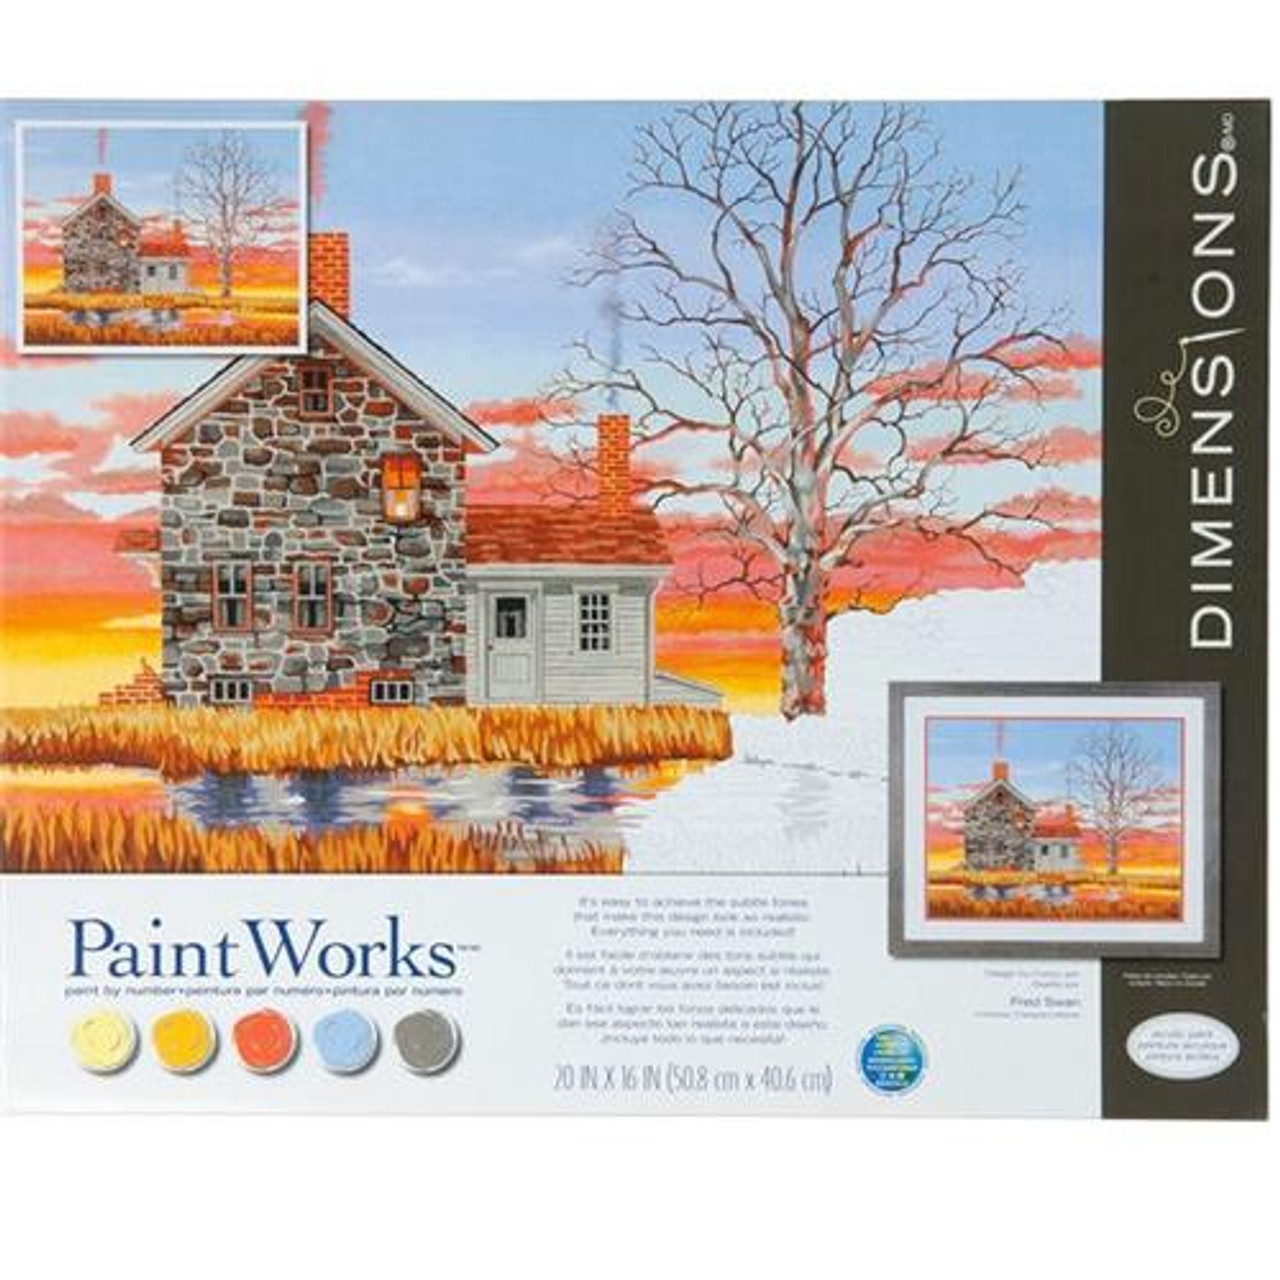 Home at Sunset- paint by number kit - Village Frame Shoppe & Gallery